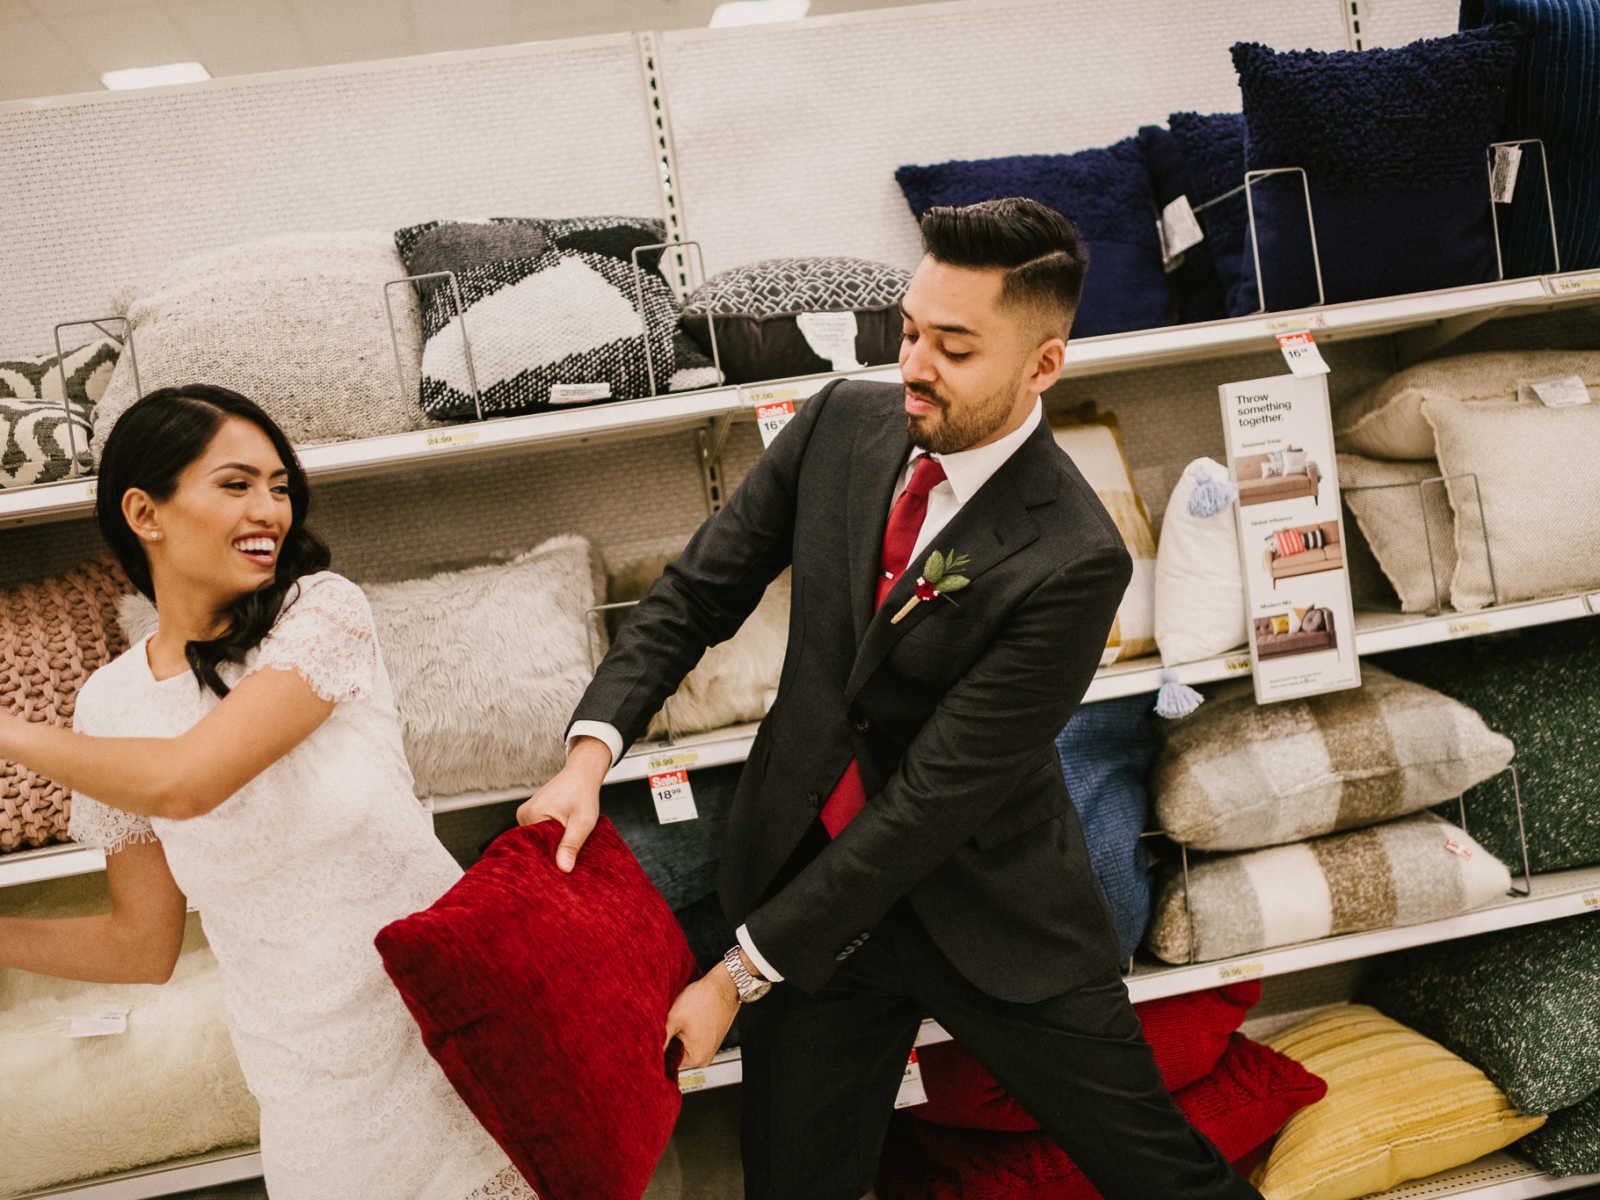 Bride and groom have pillow fight in Target pillow aisle